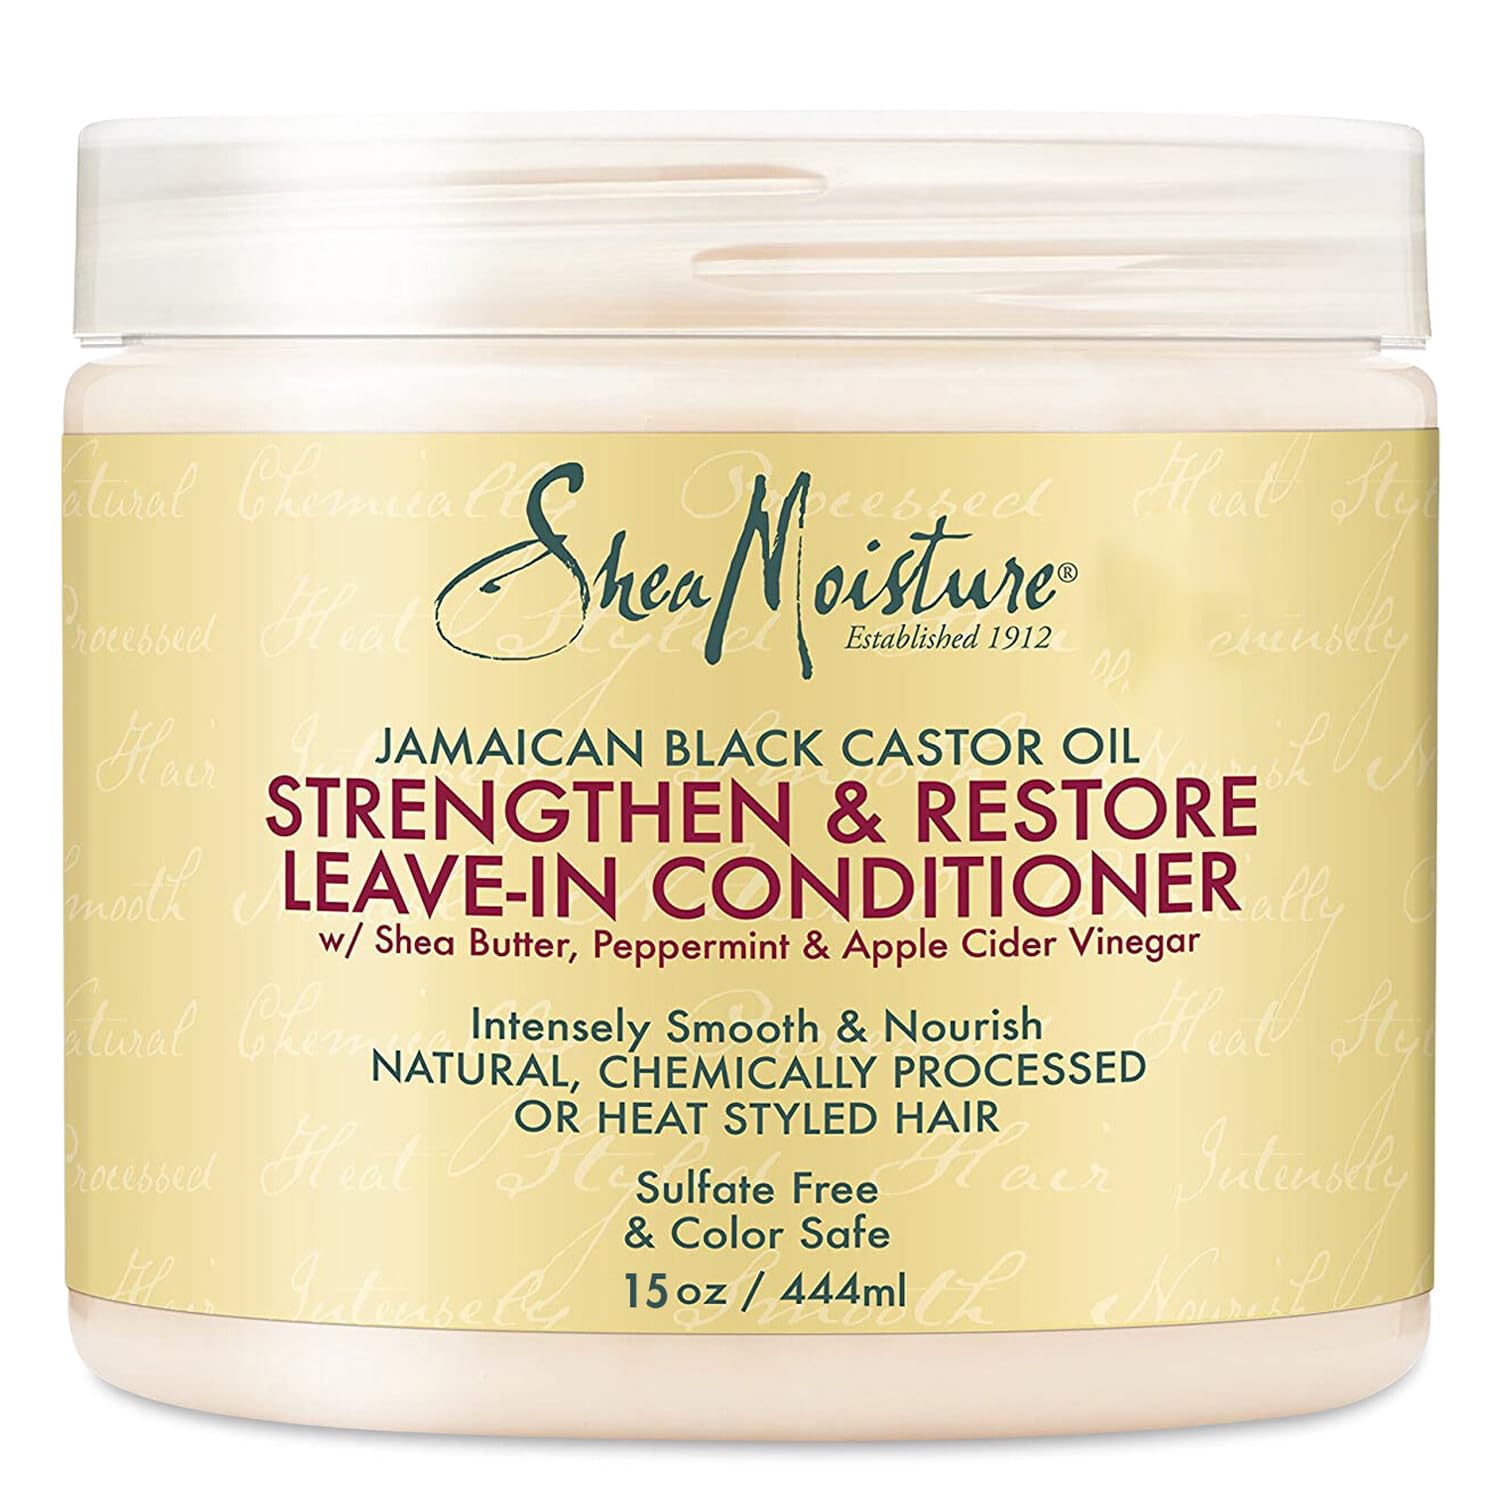 Shea Moisture Leave in Conditioner with Jamaican Black Castor Oil for Hair Growth, Strengthen & Restore, Vitamin E, Curly Hair Products Safe for use on Hair Color, Family Size, 15 Oz